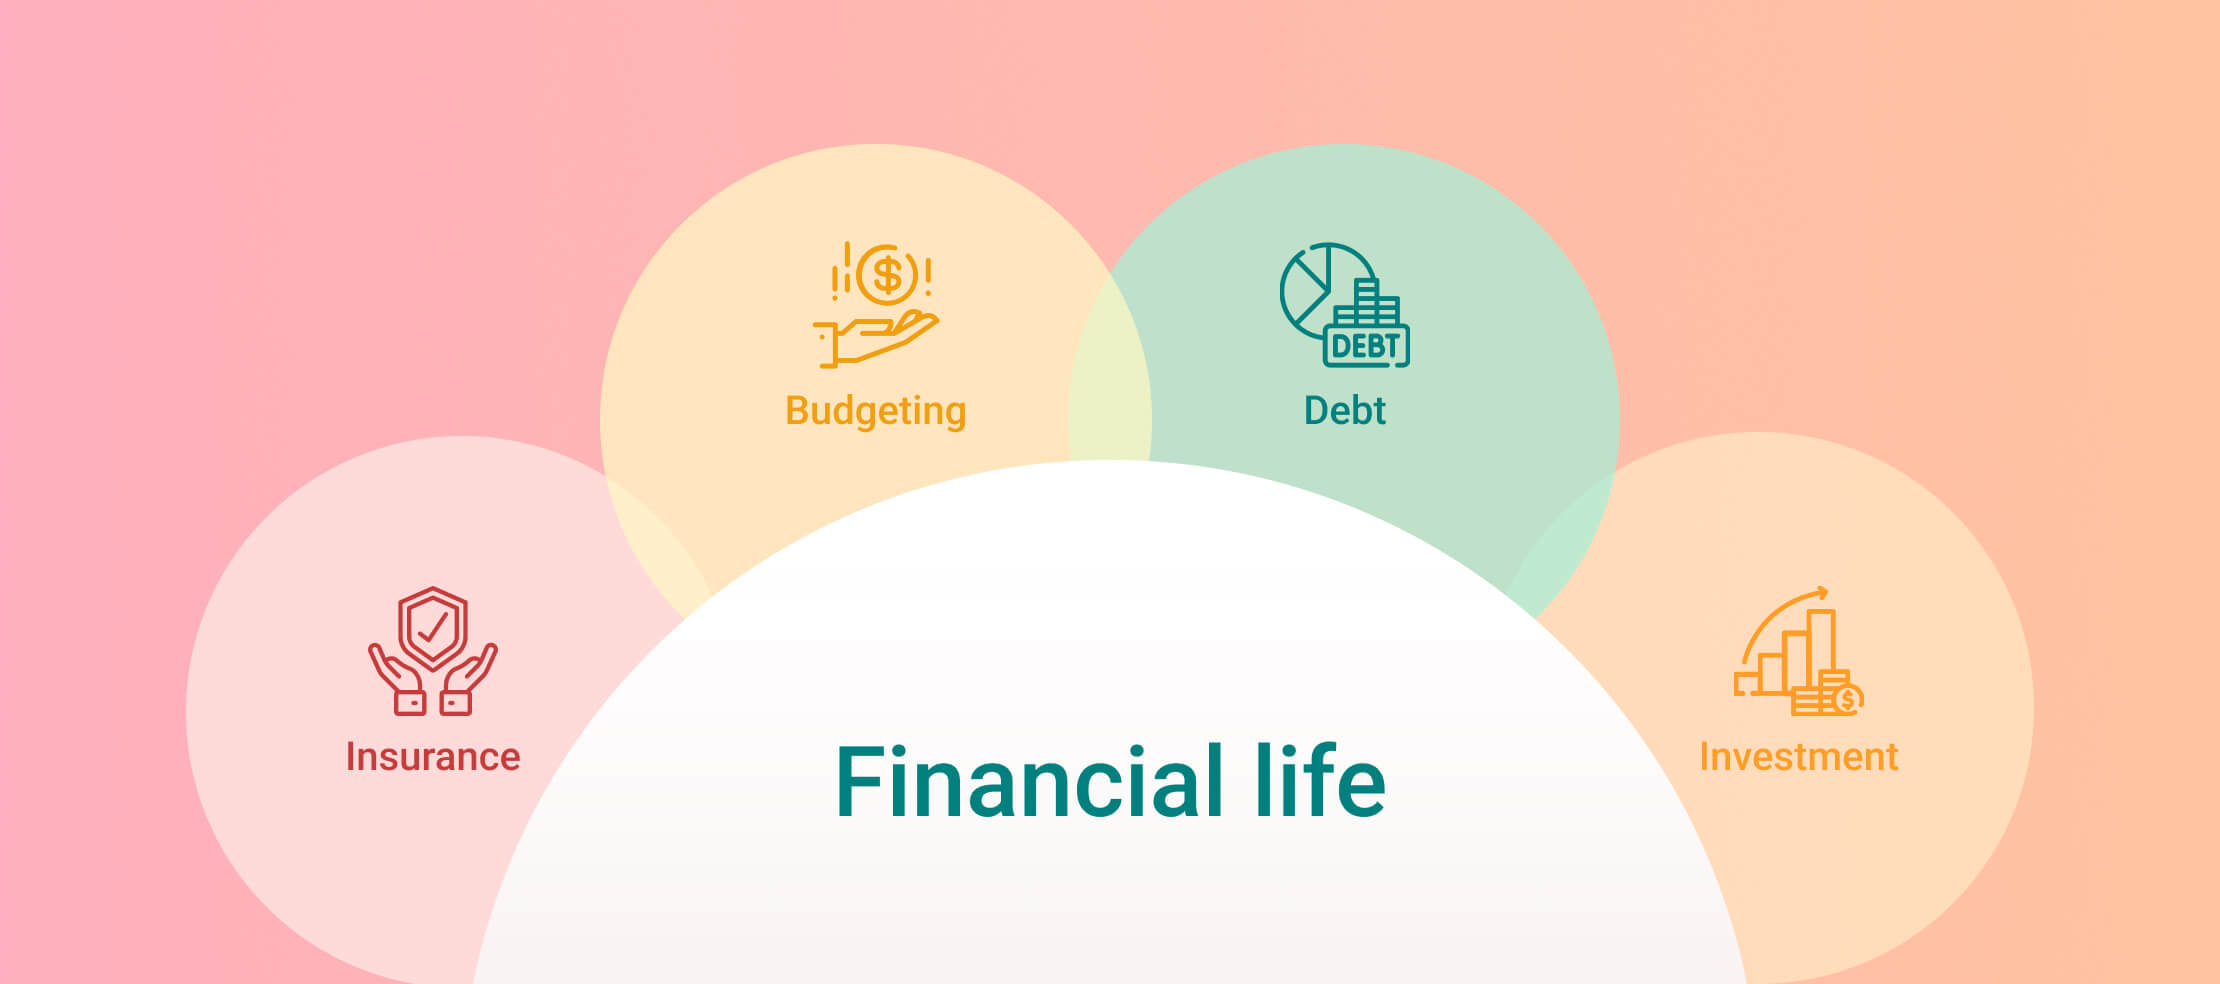 Breaking Down the Concept of 4D Financial Life